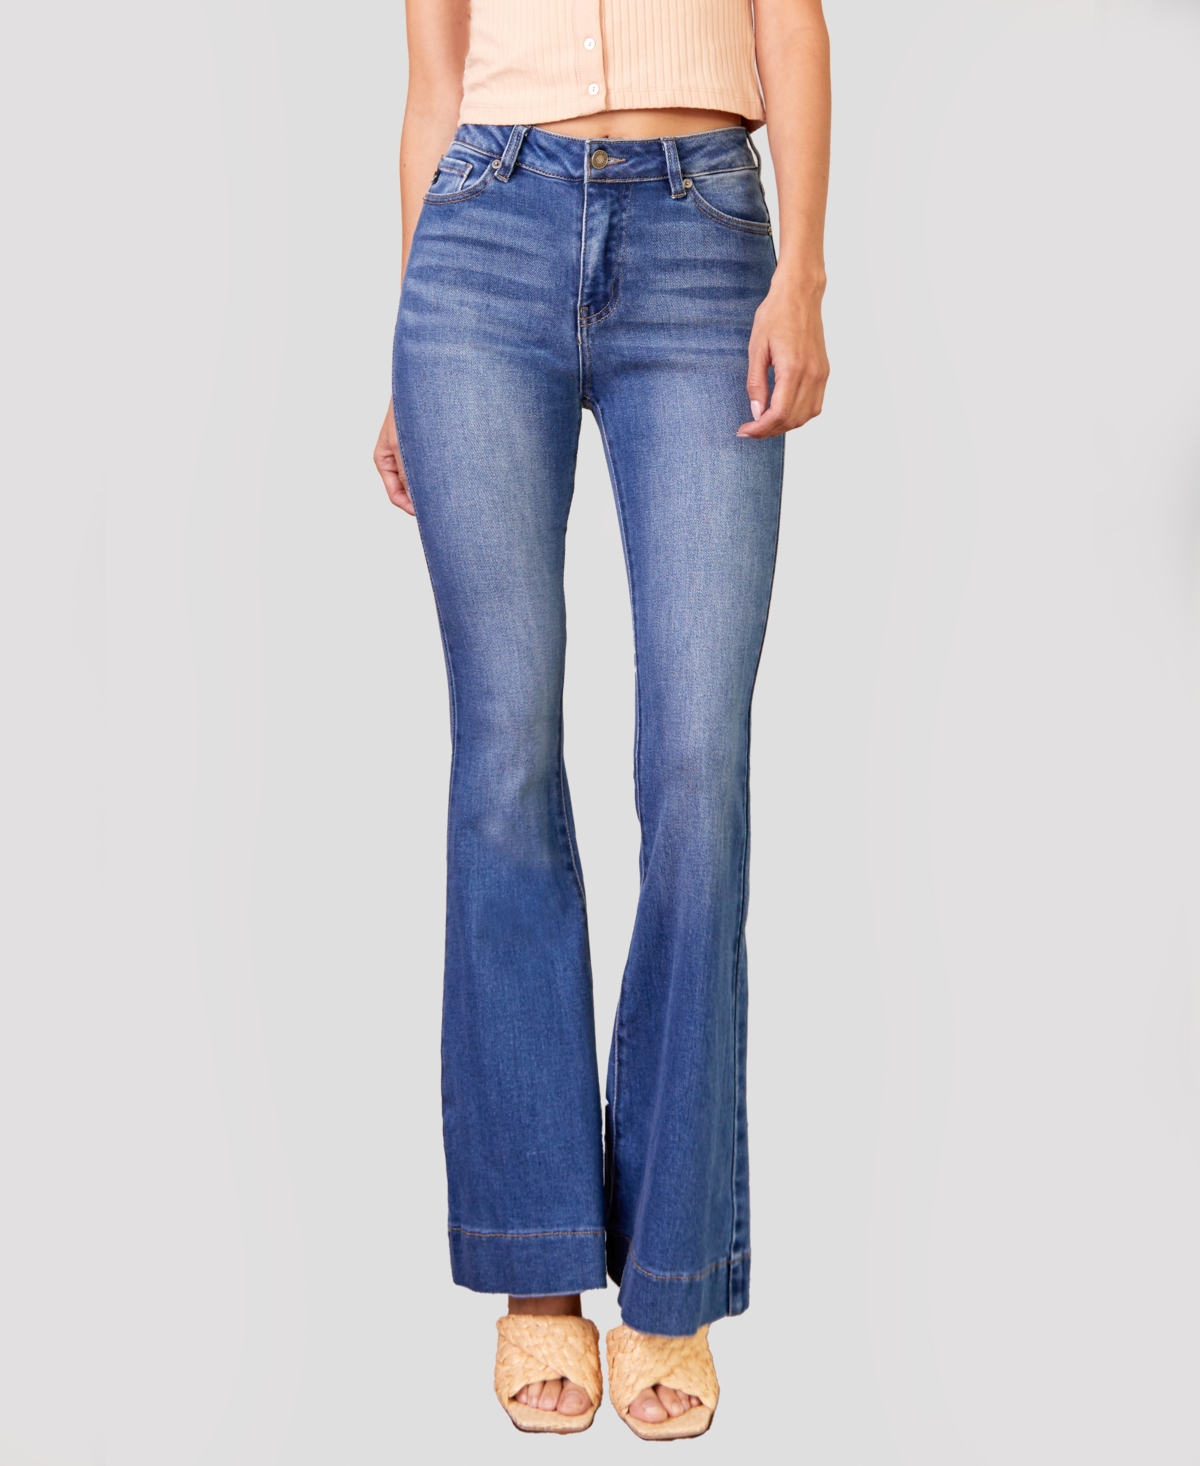 Women's High Rise Faded Stretch Flare Jeans - Blue Steel